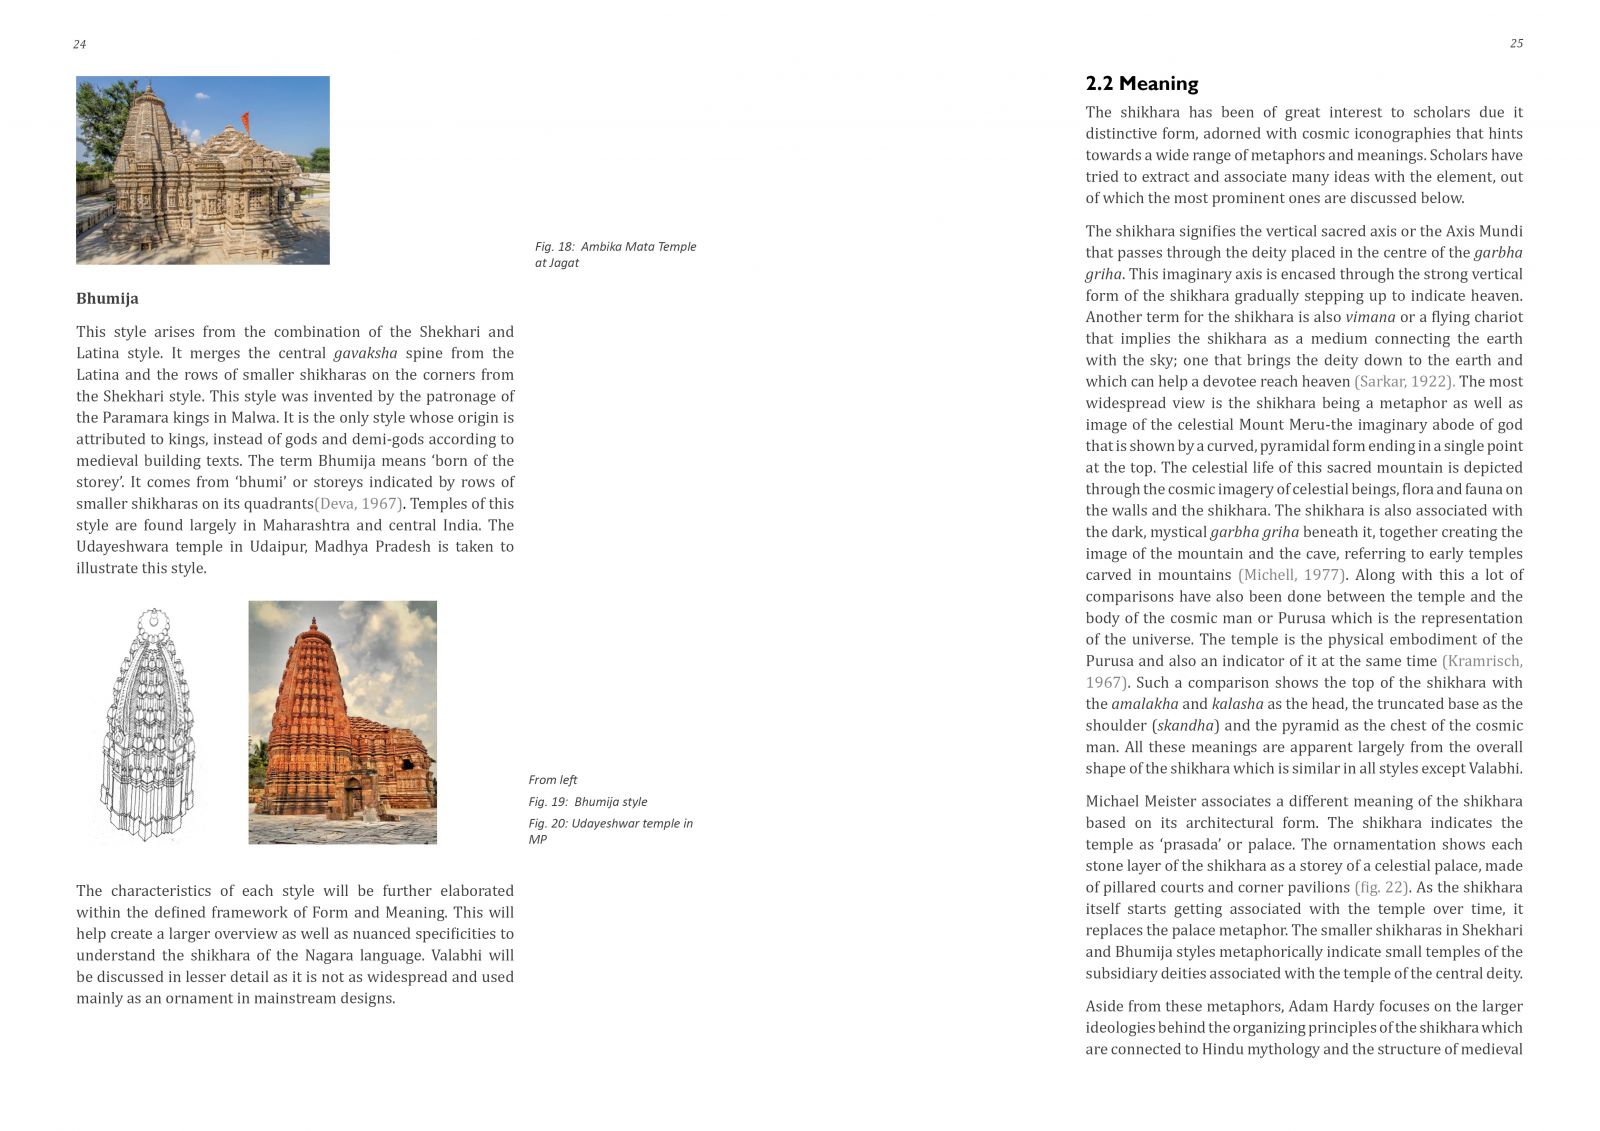 thesis on temple architecture